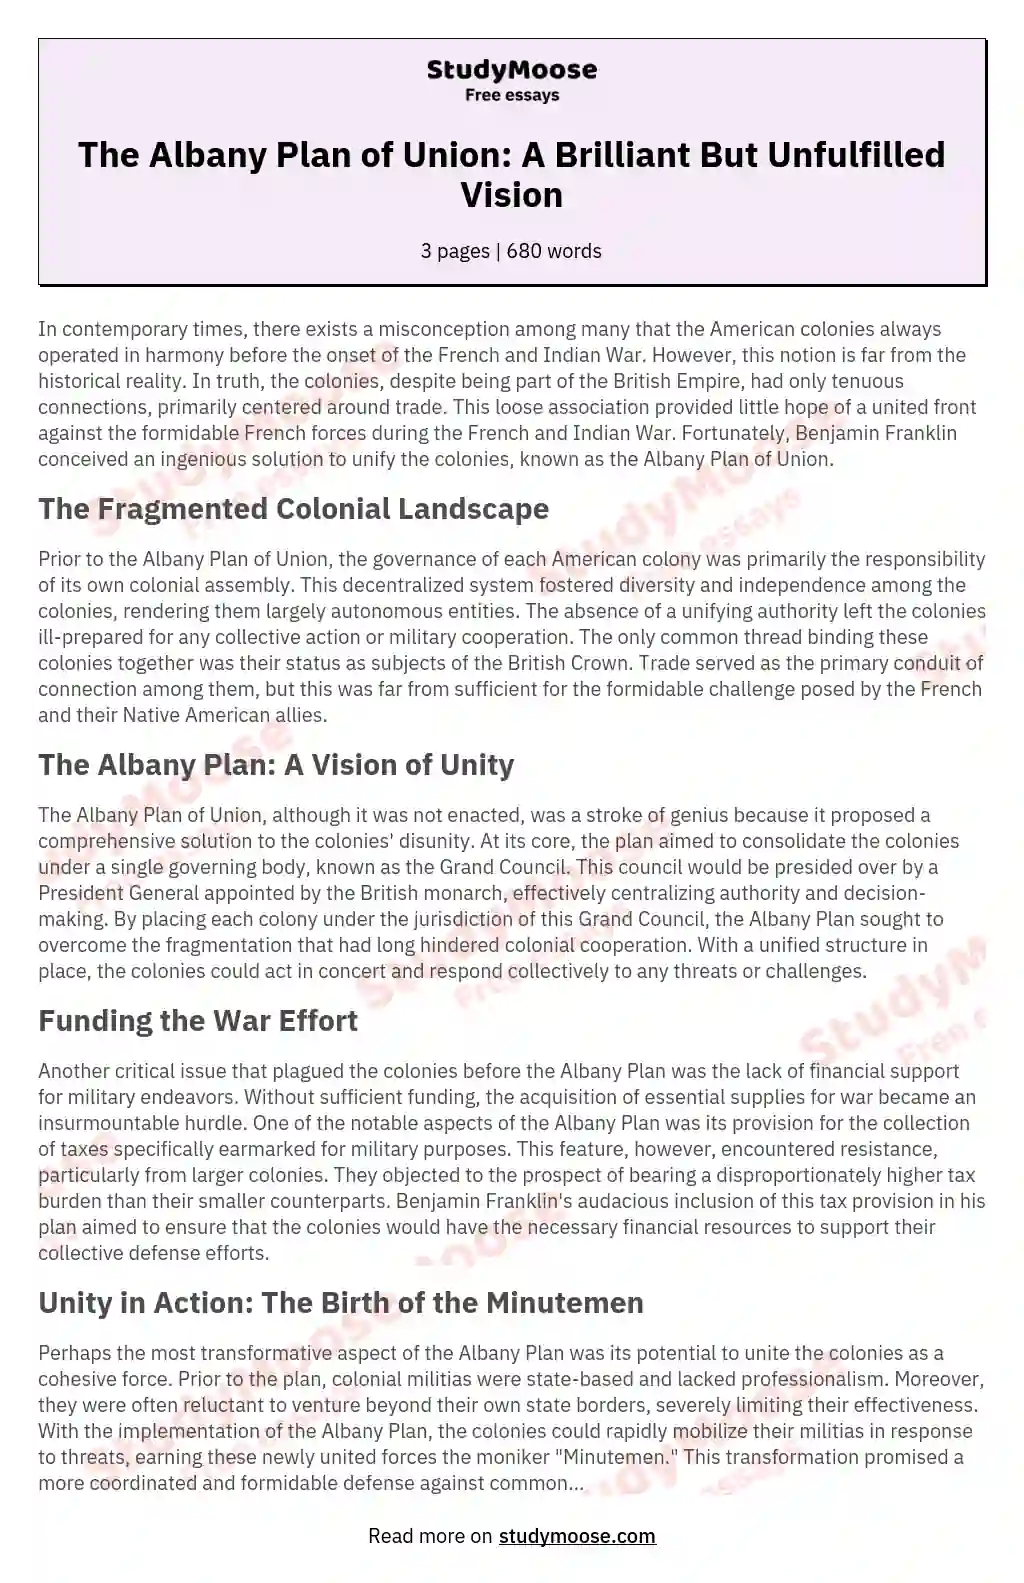 The Albany Plan of Union: A Brilliant But Unfulfilled Vision essay